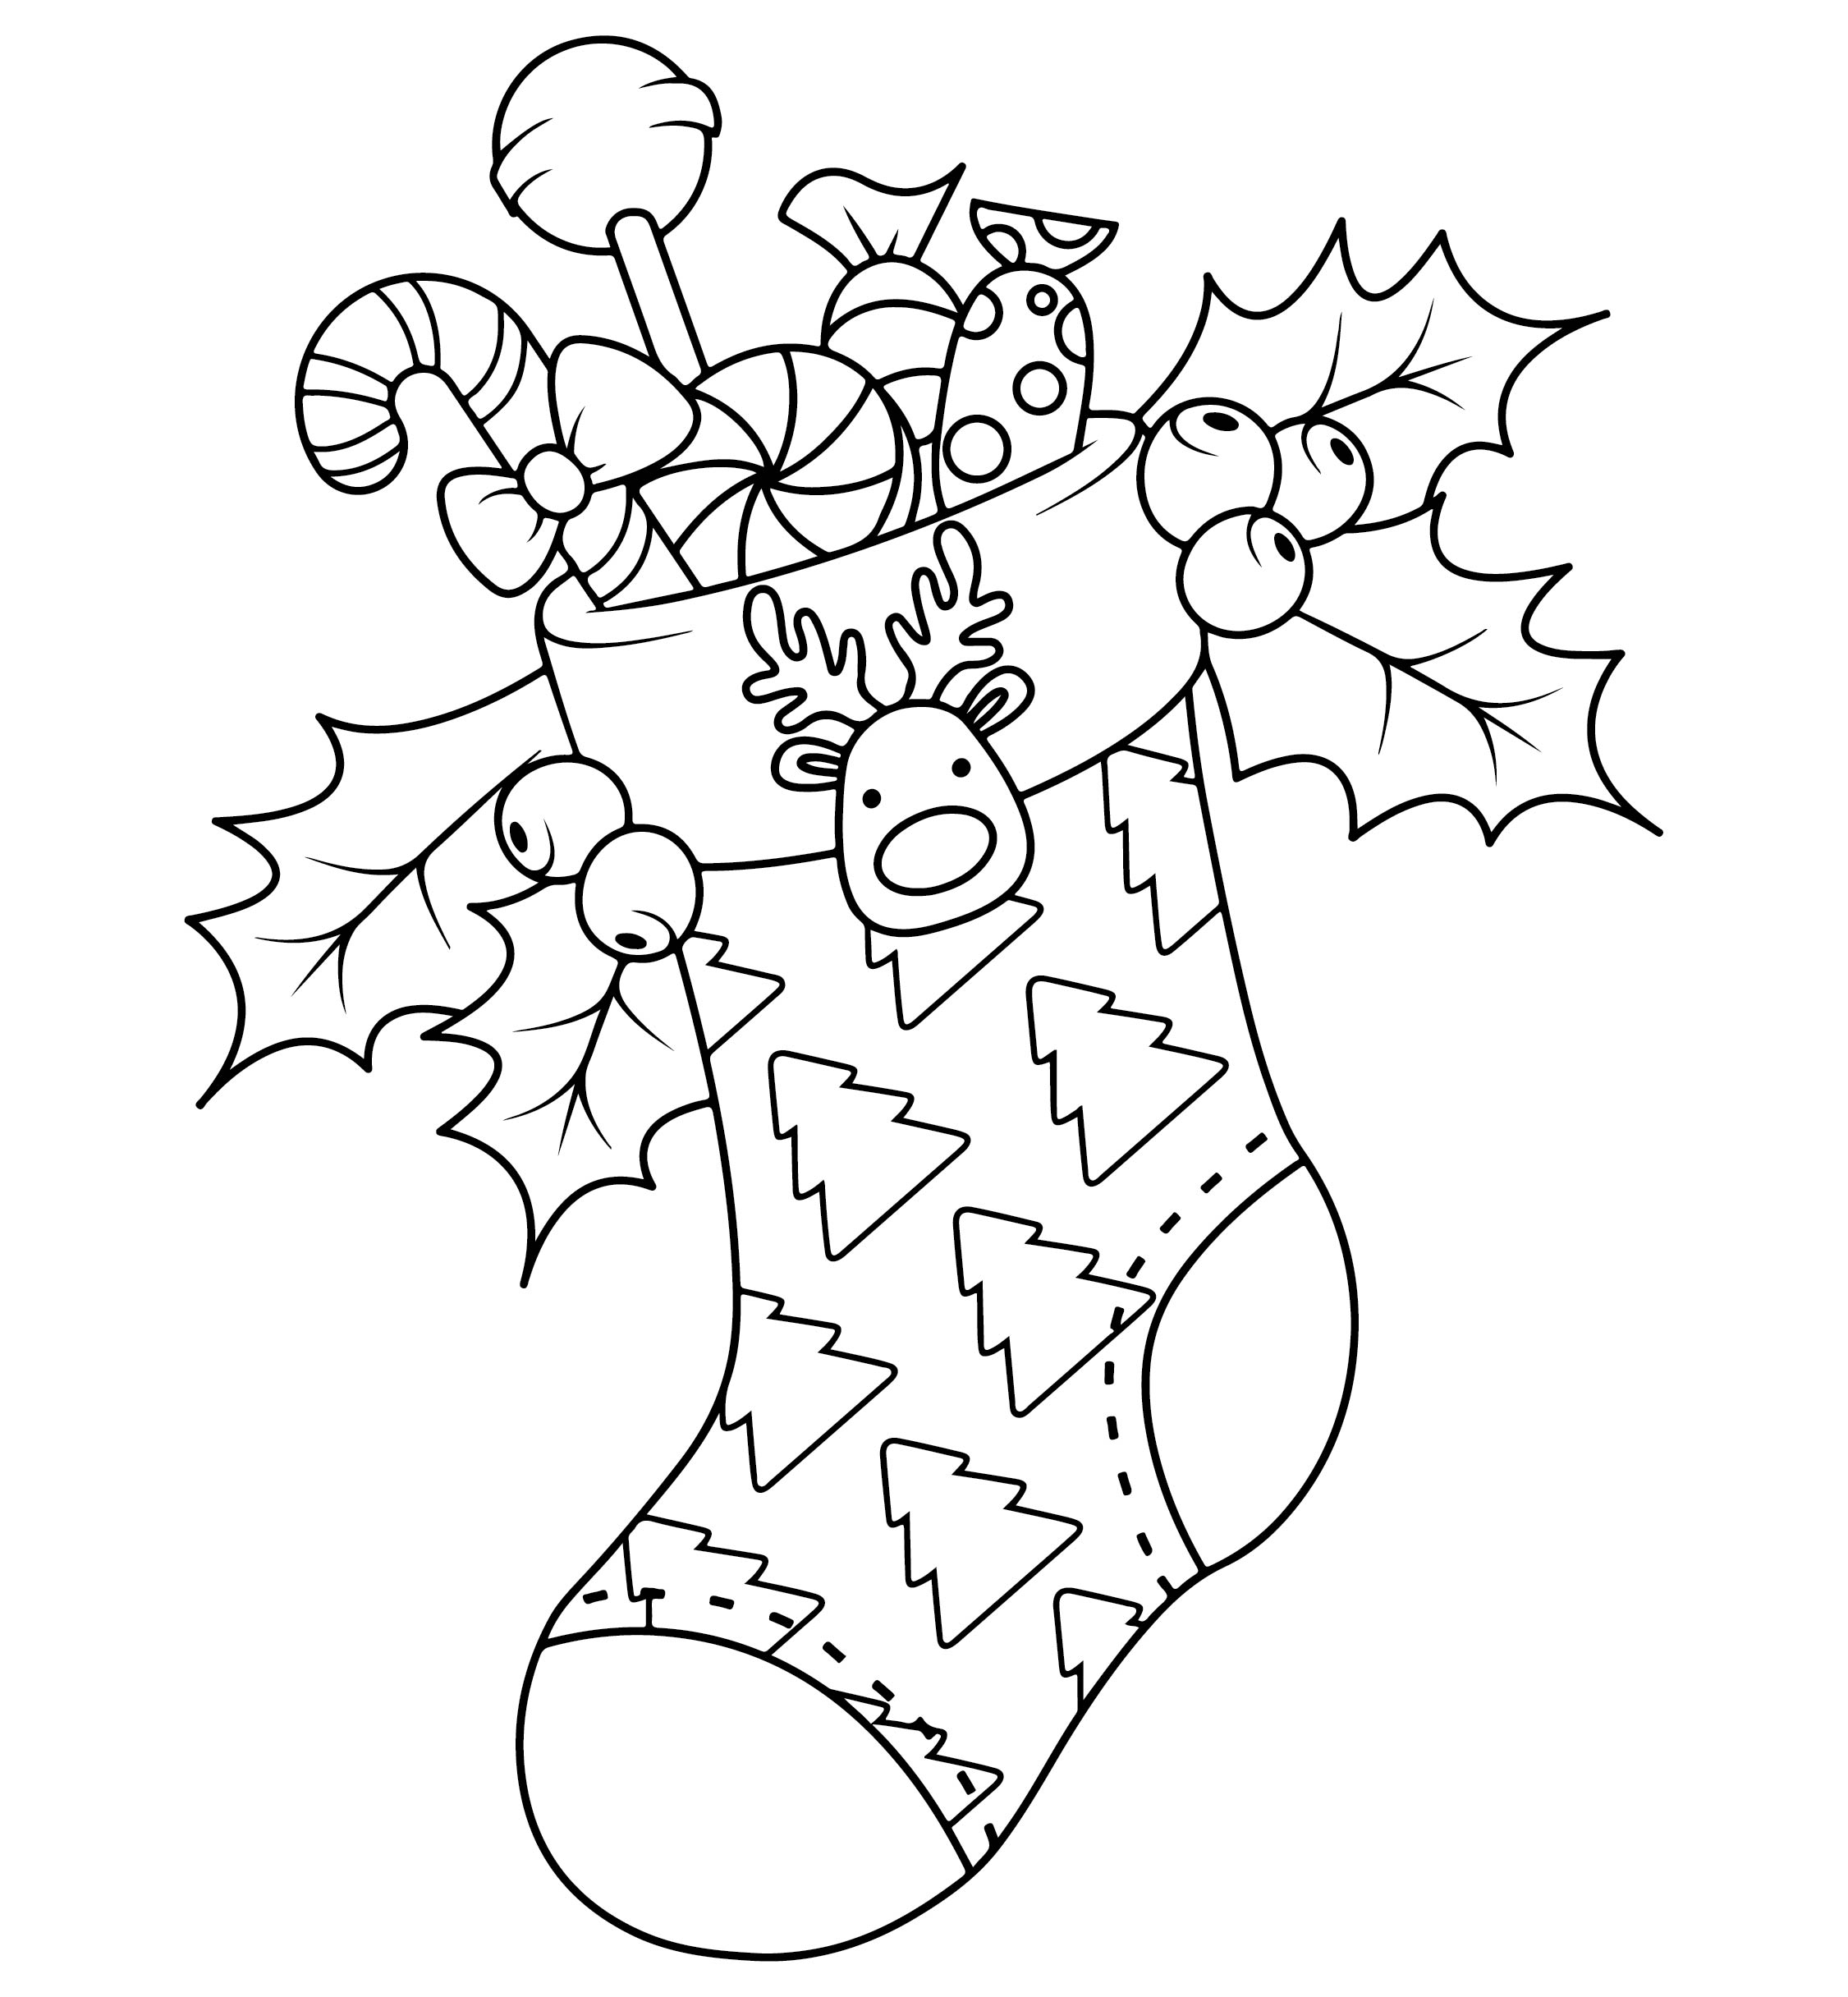 15 Best Christmas Stocking Coloring Pages Printable